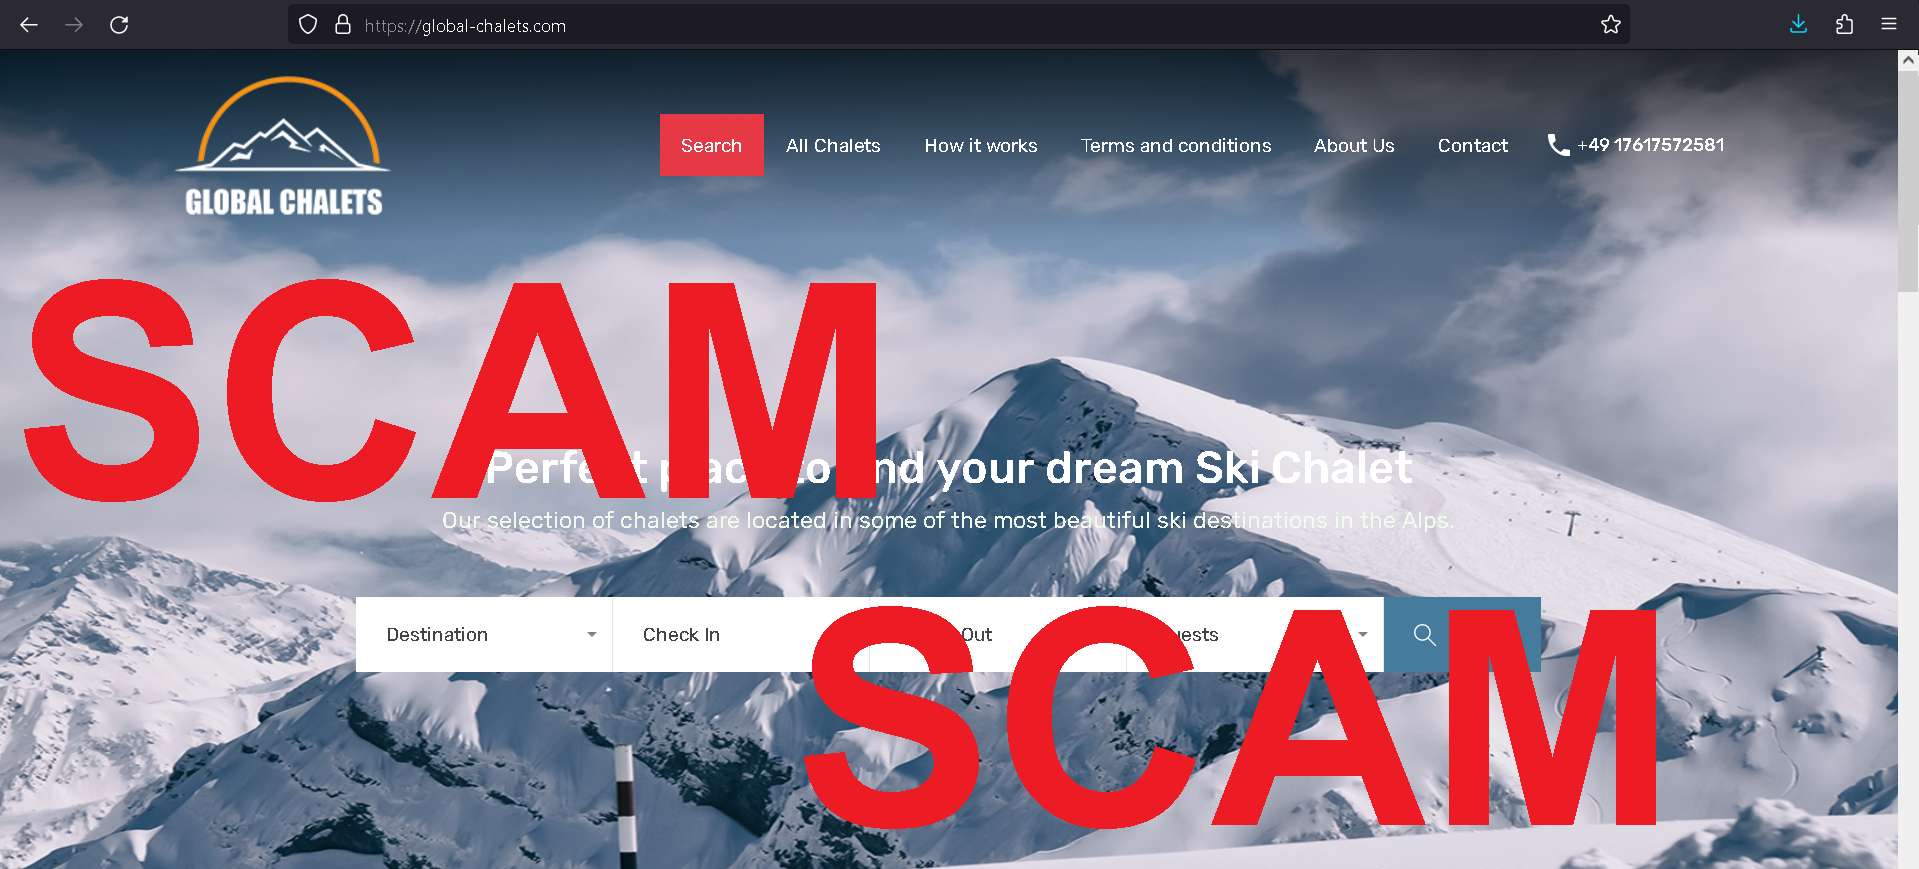 You are currently viewing Fraudulent website: global-chalets.com SCAM SCAM